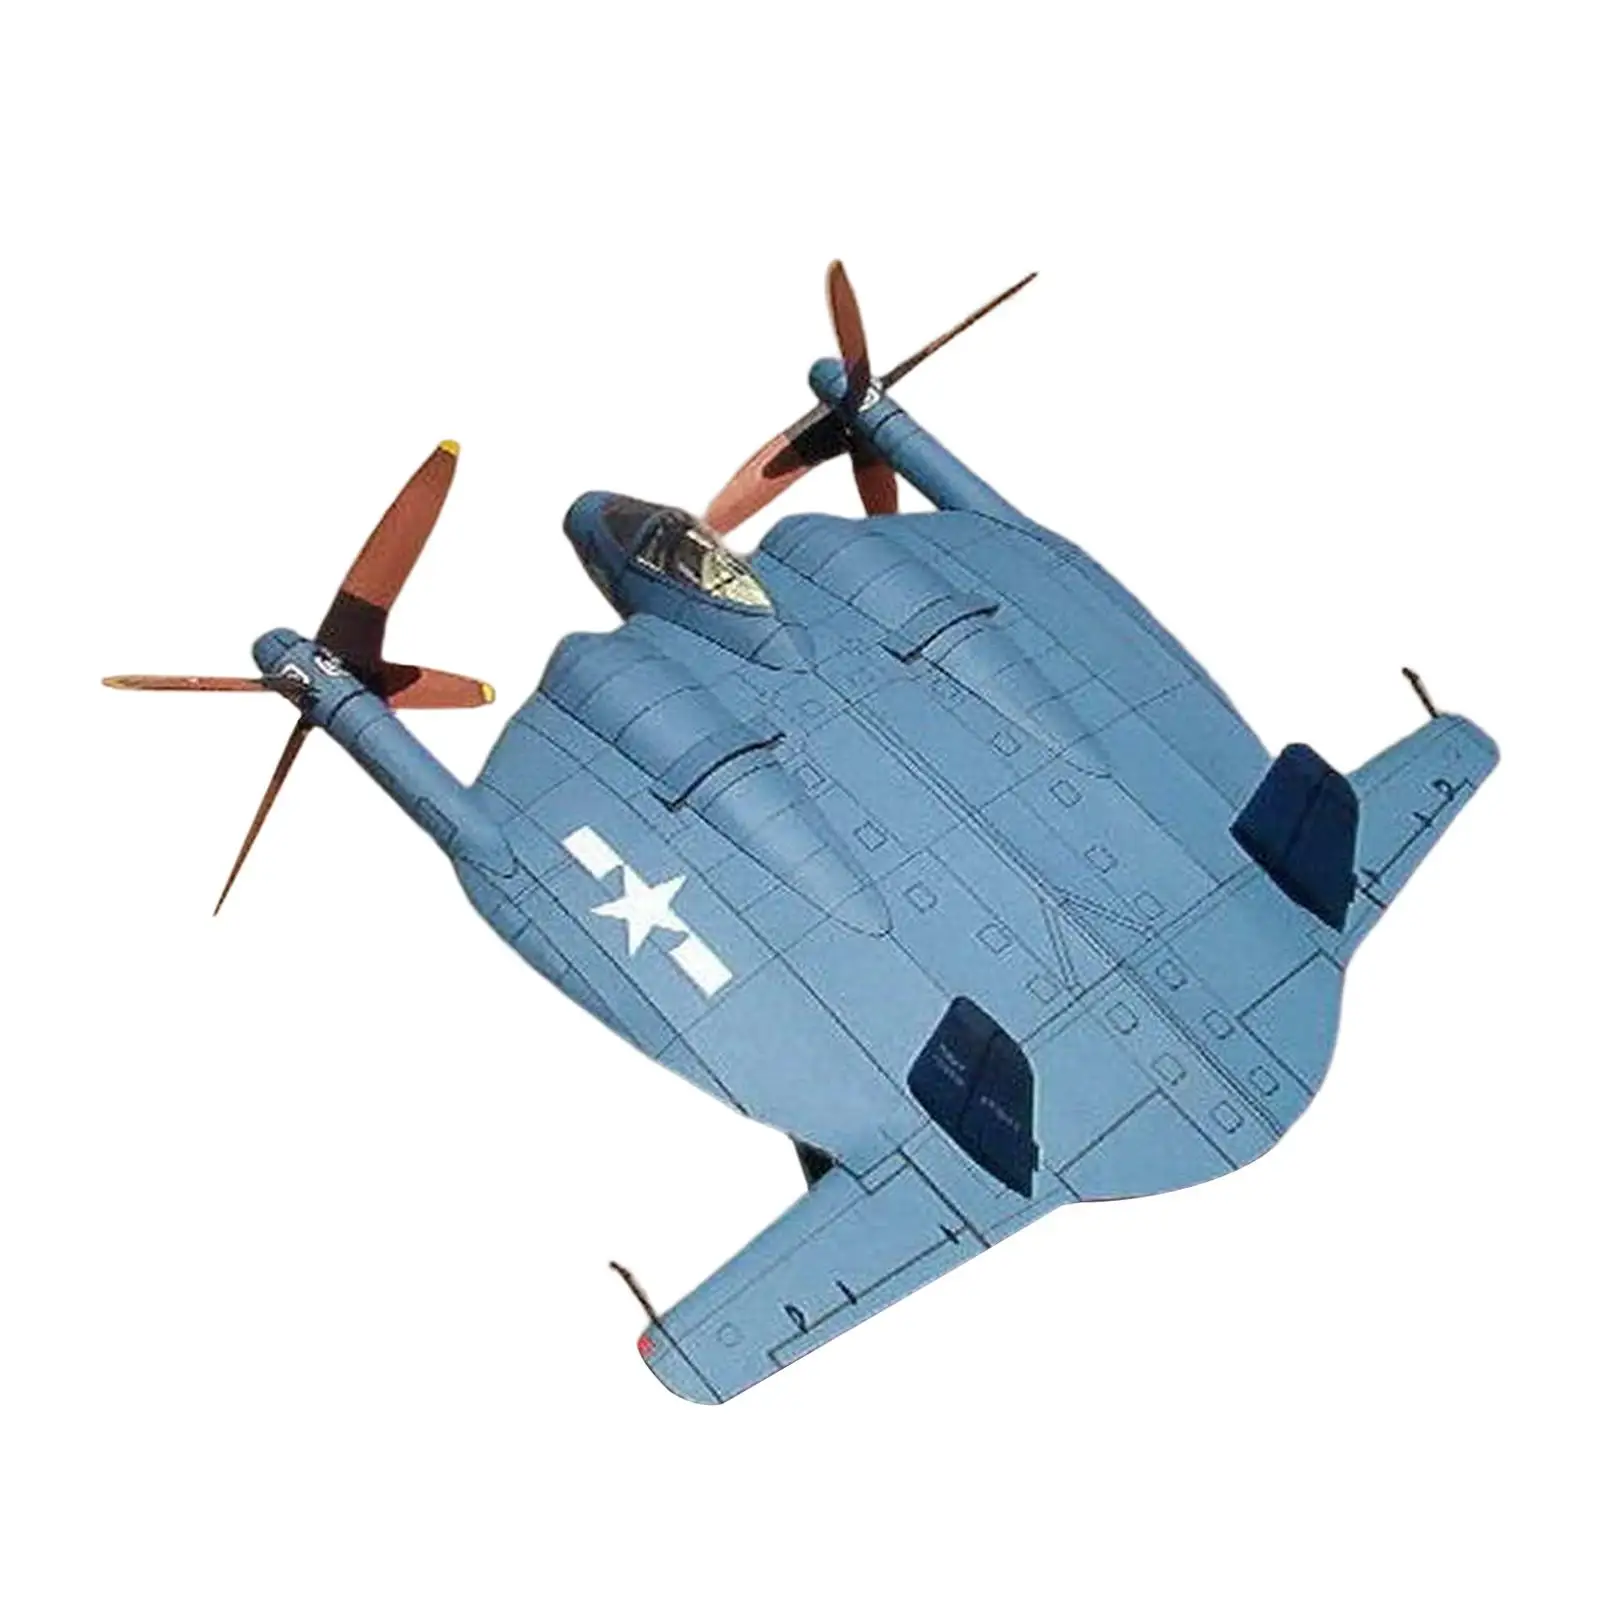 Air Aviation aircraft Paper Model Miniature Hobby Education Toys Fighter Model Toy for Decor Teens Souvenir